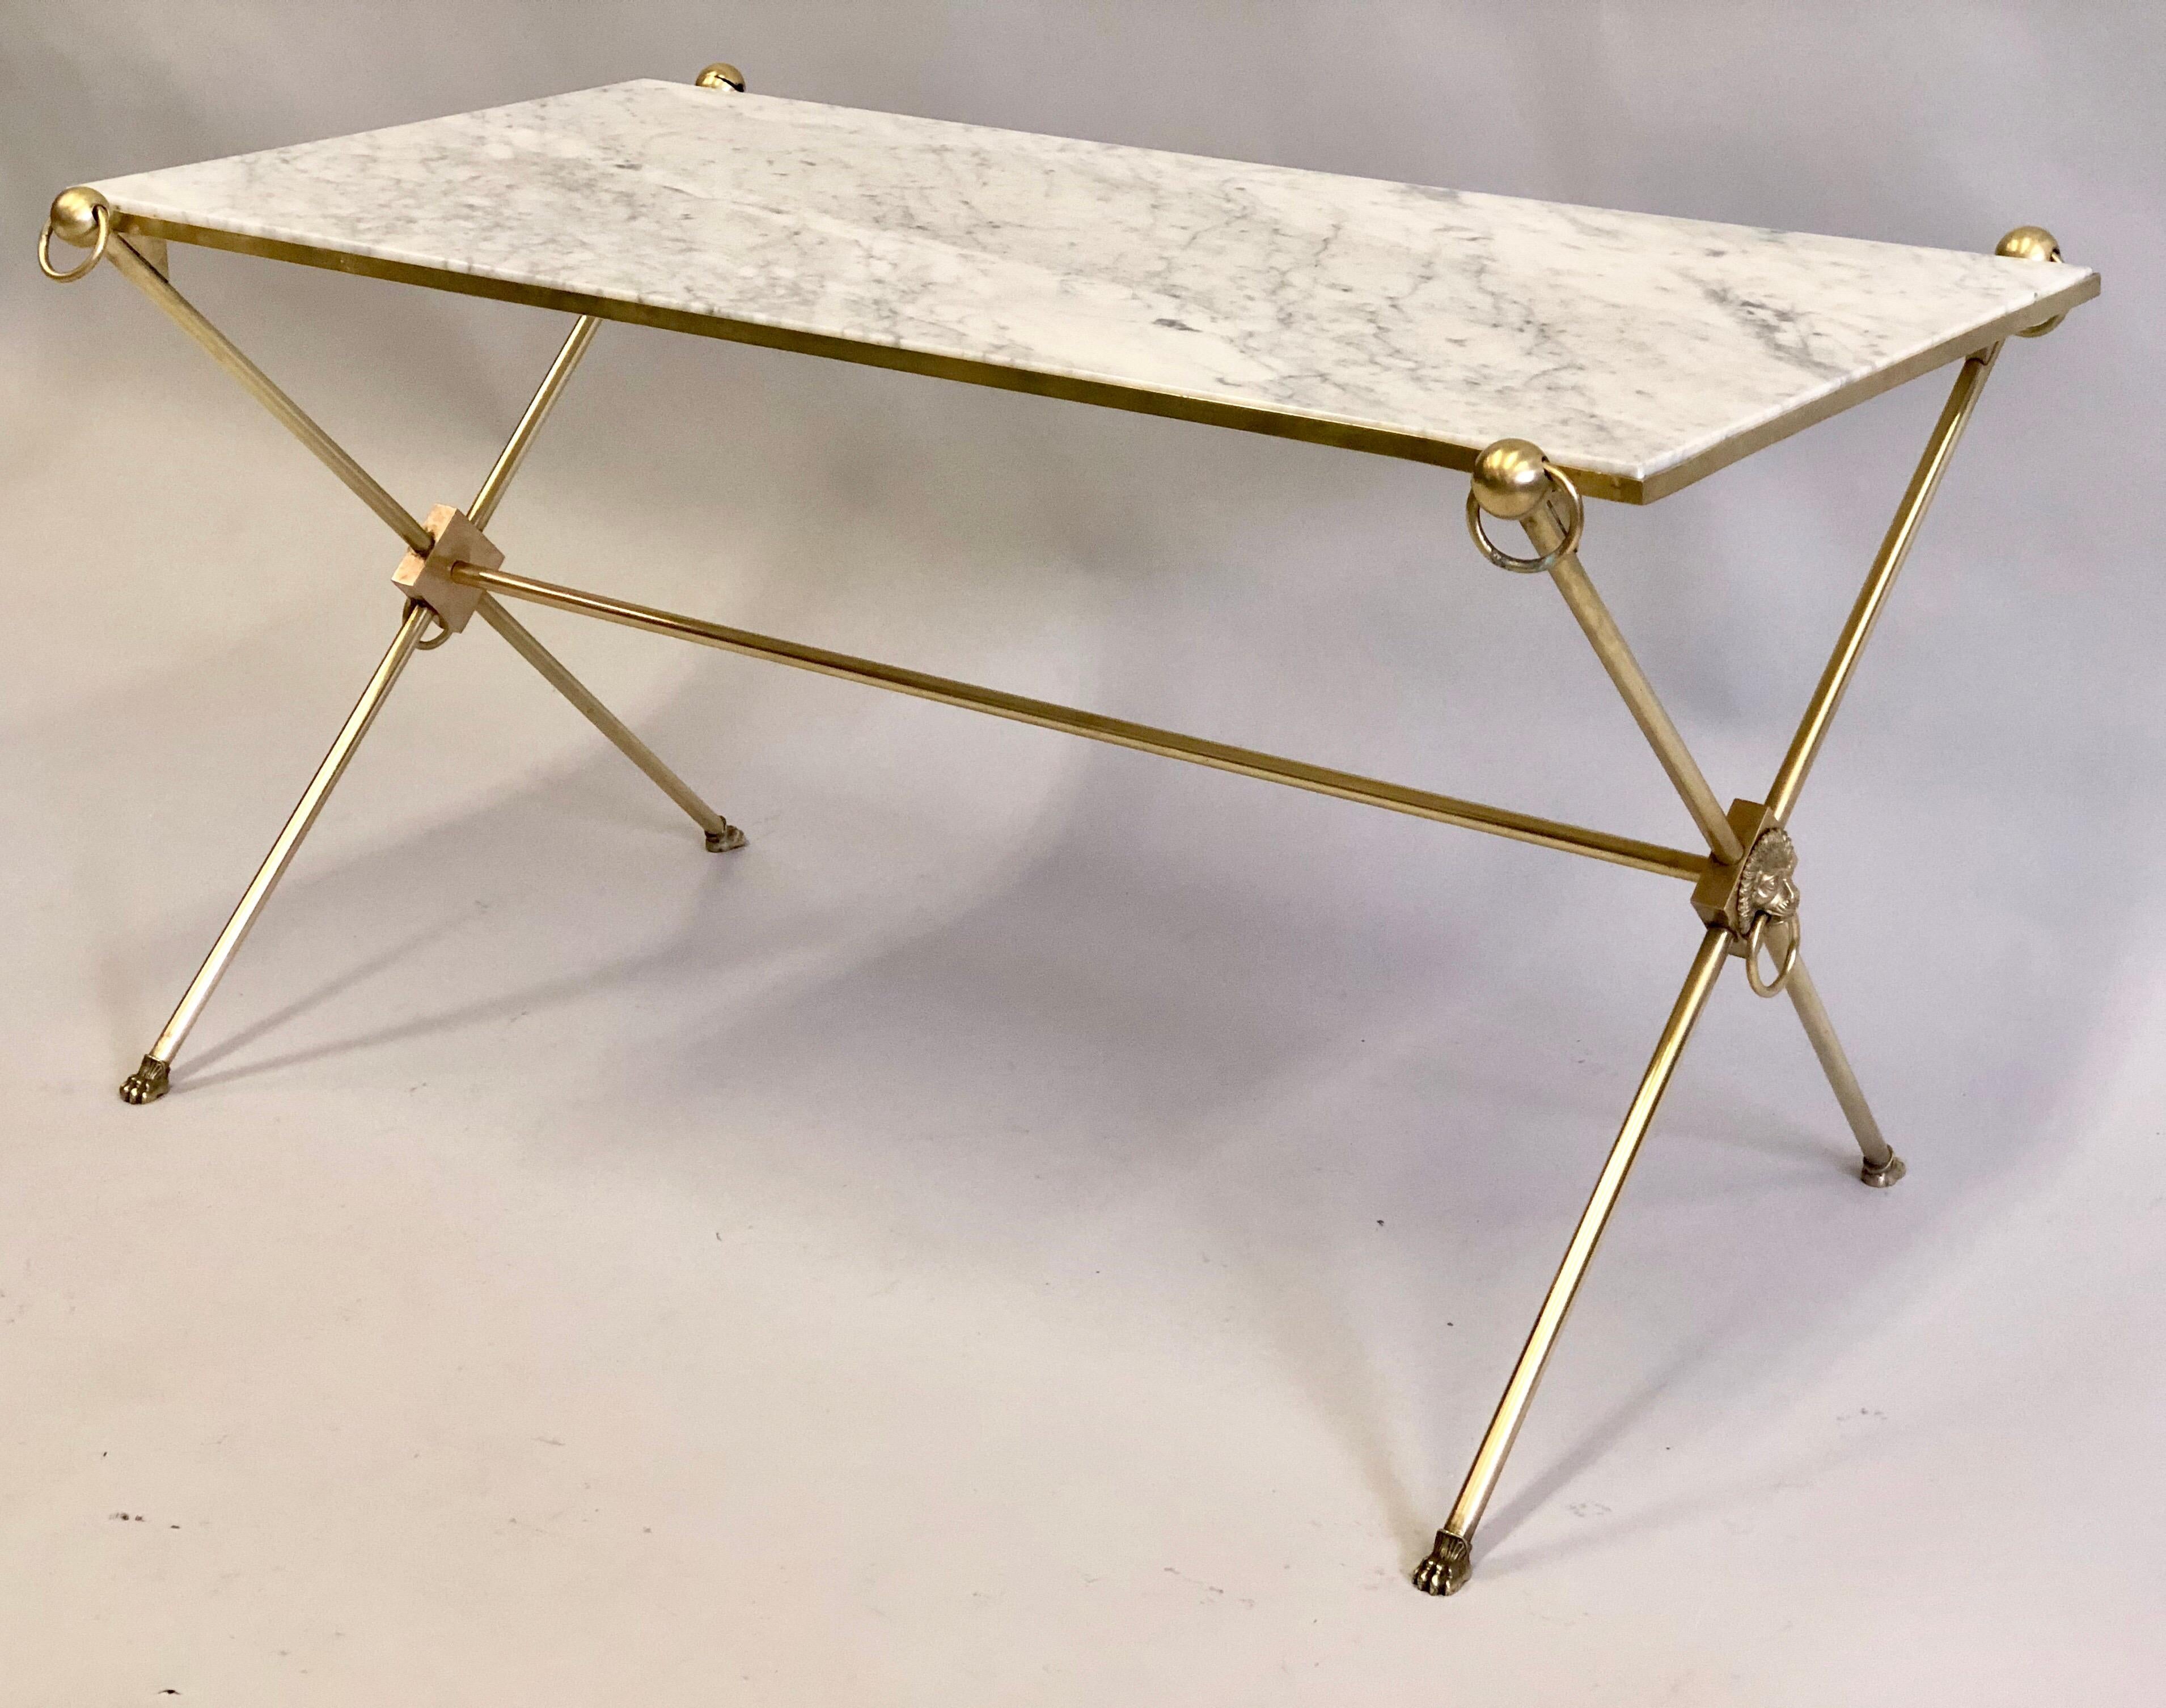 Elegant French Mid-Century Modern Neoclassical solid brass and Italian marble coffee table by Maison Jansen, circa 1950. A classic, yet modern design with pure, timeless materials. The frame is constructed of solid brass with white Italian Carrara